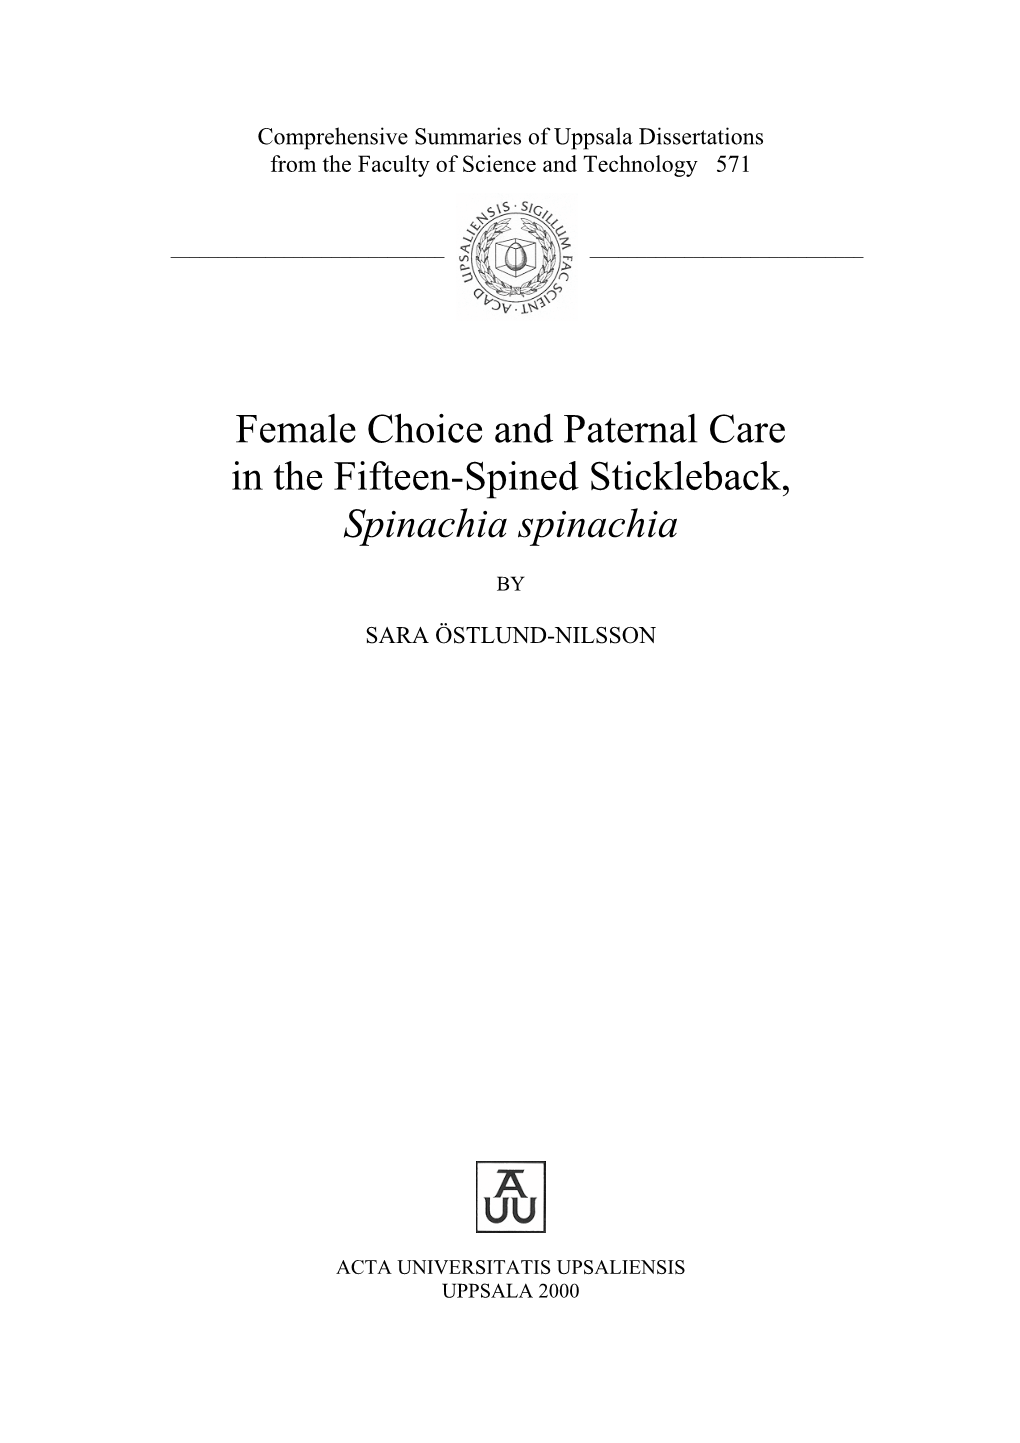 Female Choice and Paternal Care in the Fifteen-Spined Stickleback, Spinachia Spinachia